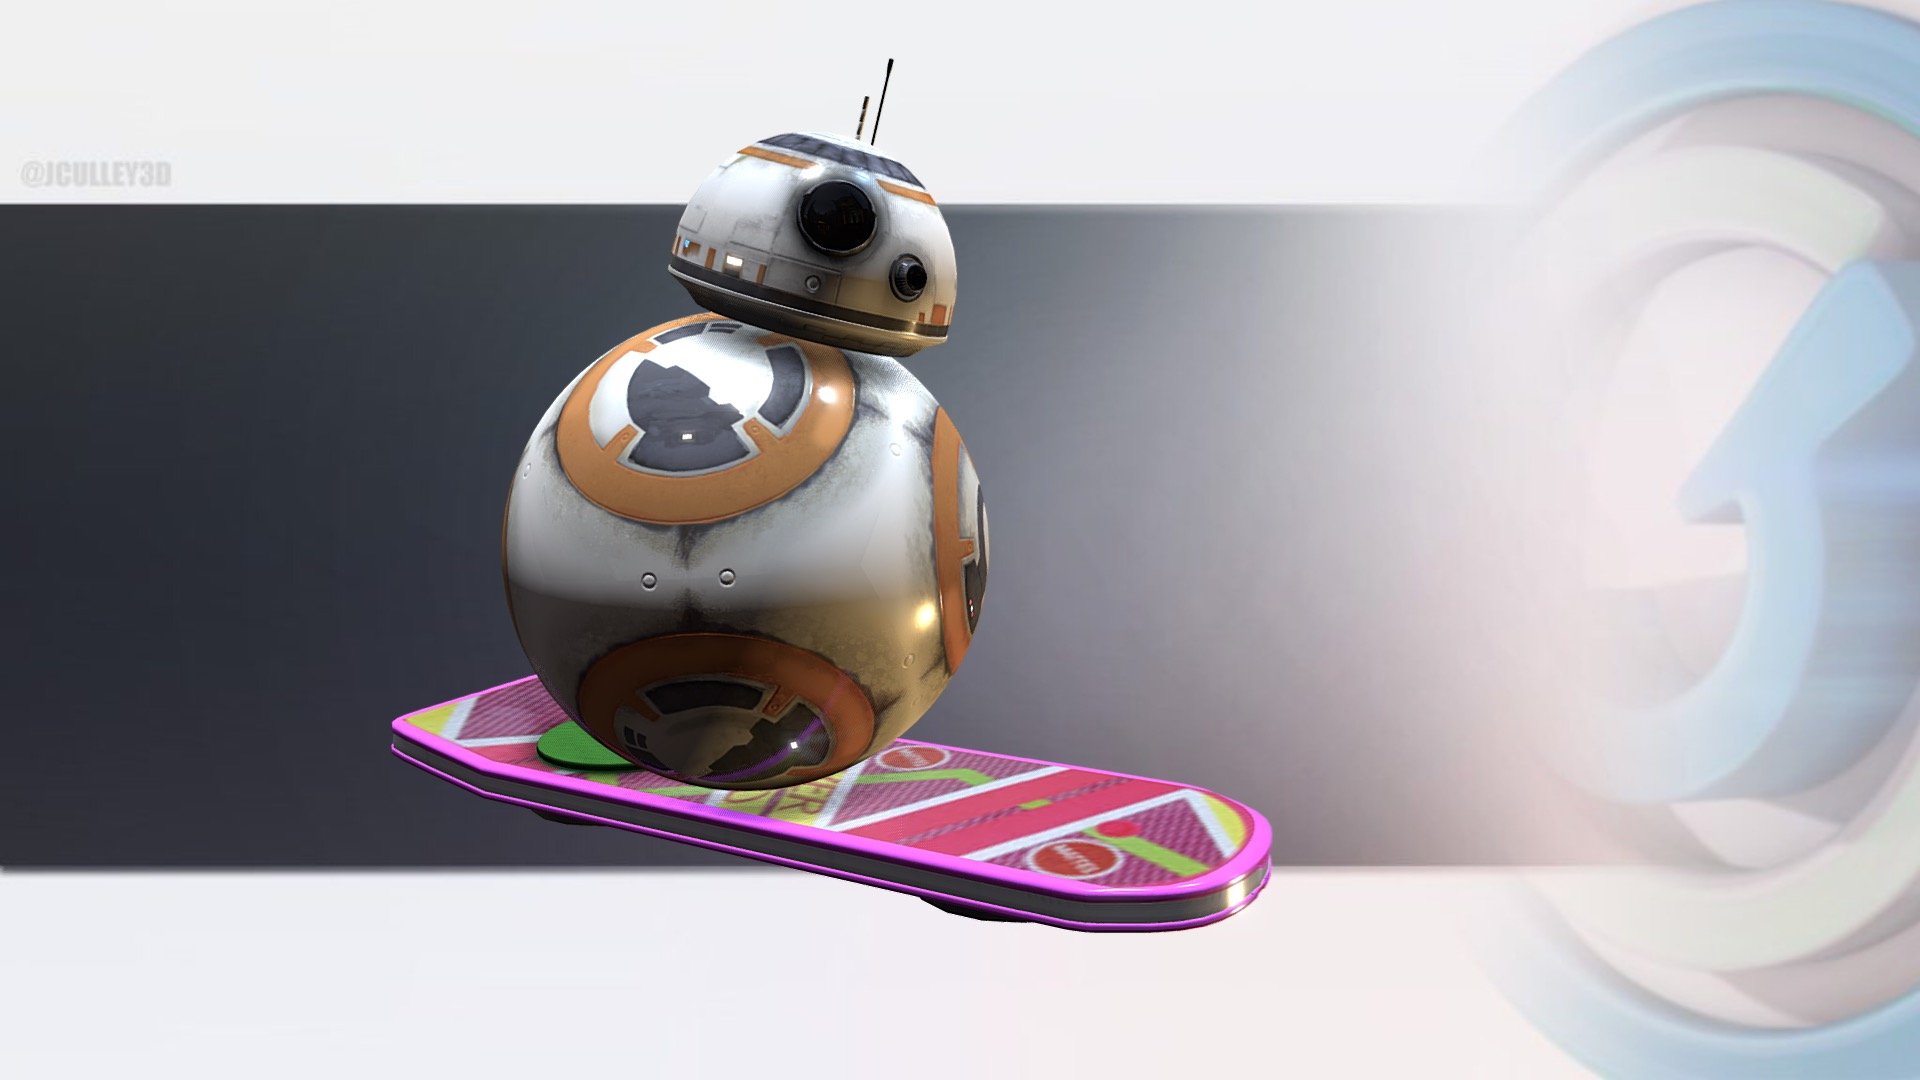 In honour of 21/10/15 a special version of my BB8 Model that I made for a CGI short movie..  The Hoverboard is only screen accurate from the top view as the underside wasn't in view in my movie so I didn't model the underside details.. perhaps I will update it at some point.

The DeLorean in the background is another one of my assets:  https://sketchfab.com/models/8f53f7146cf8463a8903caf5fb3db1b6
Here is the movie:
https://www.youtube.com/watch?v=ltkTSoWh_60 - Star Wars BB8 on a BTTF Hoverboard - Buy Royalty Free 3D model by JCulley3D (@jamesculley) 3d model